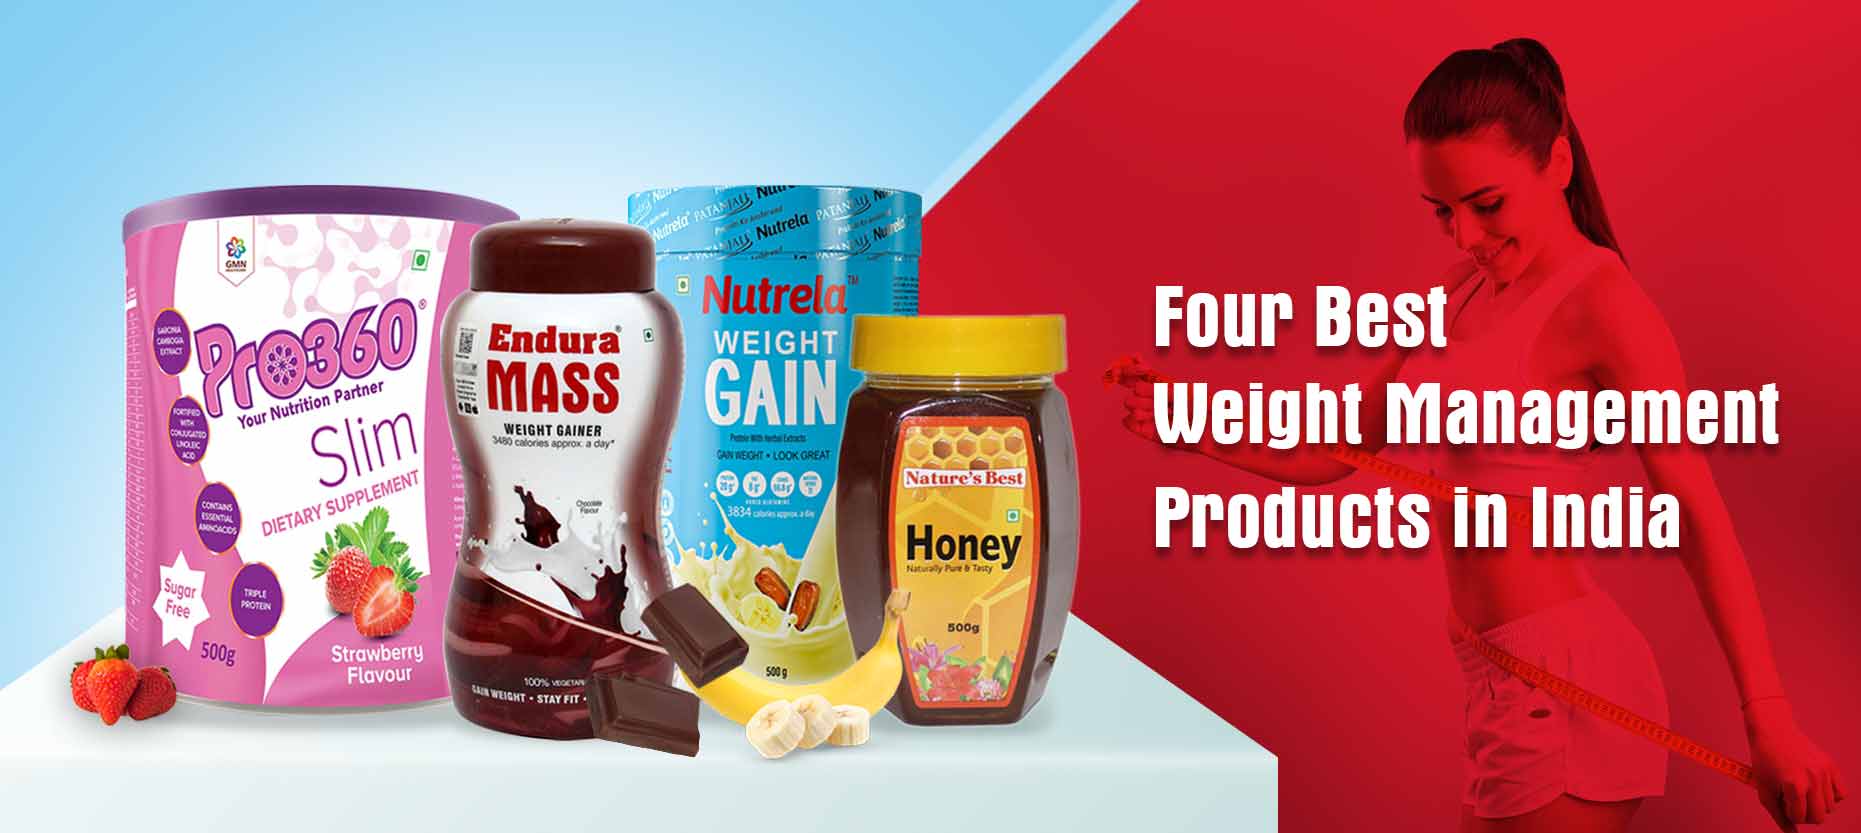 Four Best Weight Management Products in India